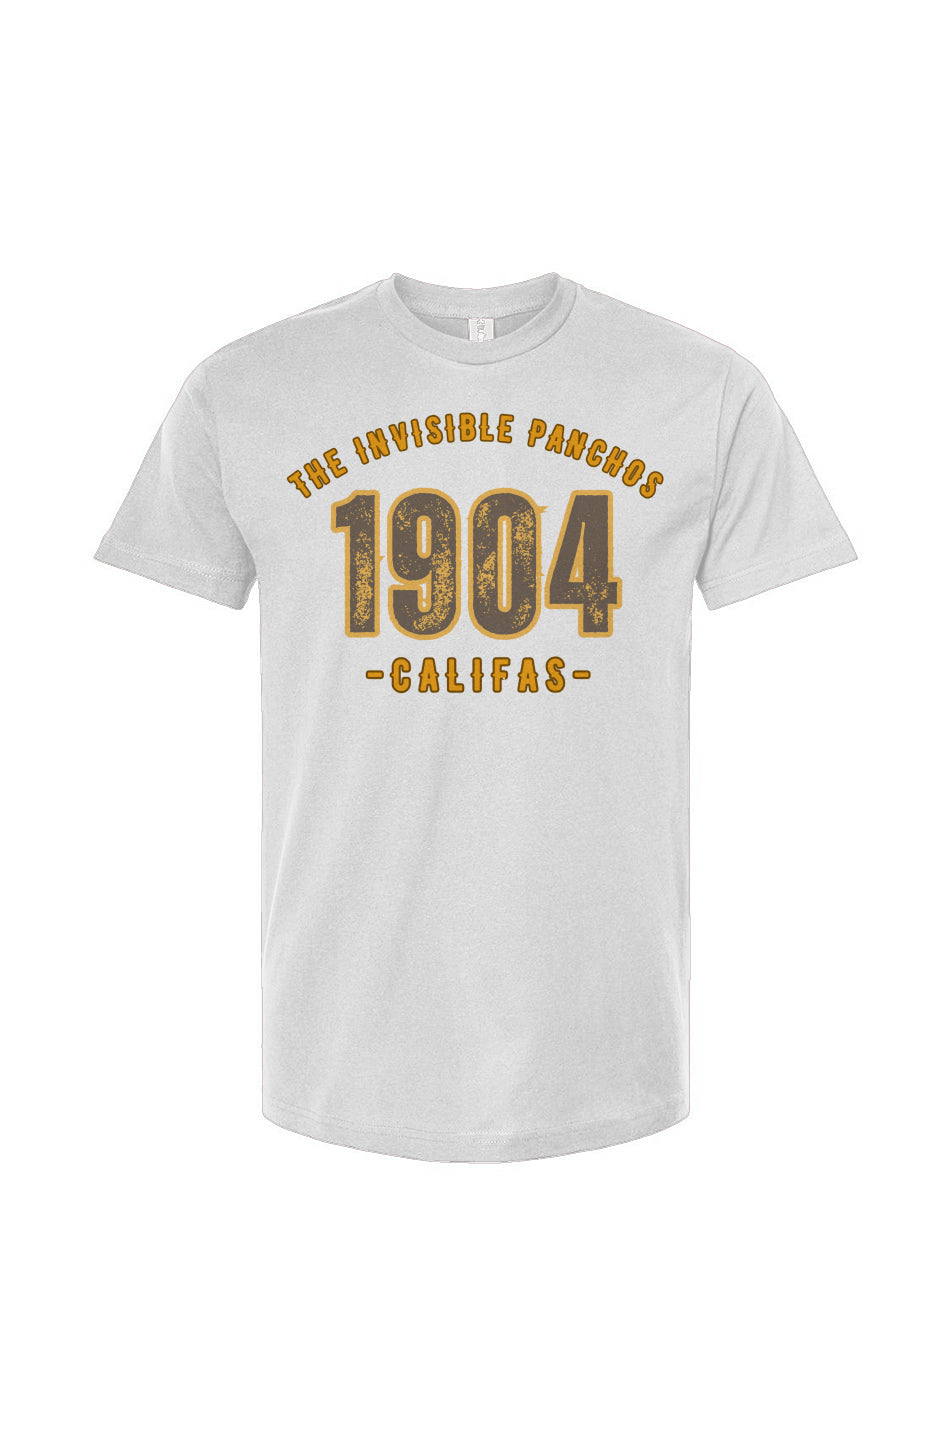 The Invisible Panchos 1904 T- Gold/White